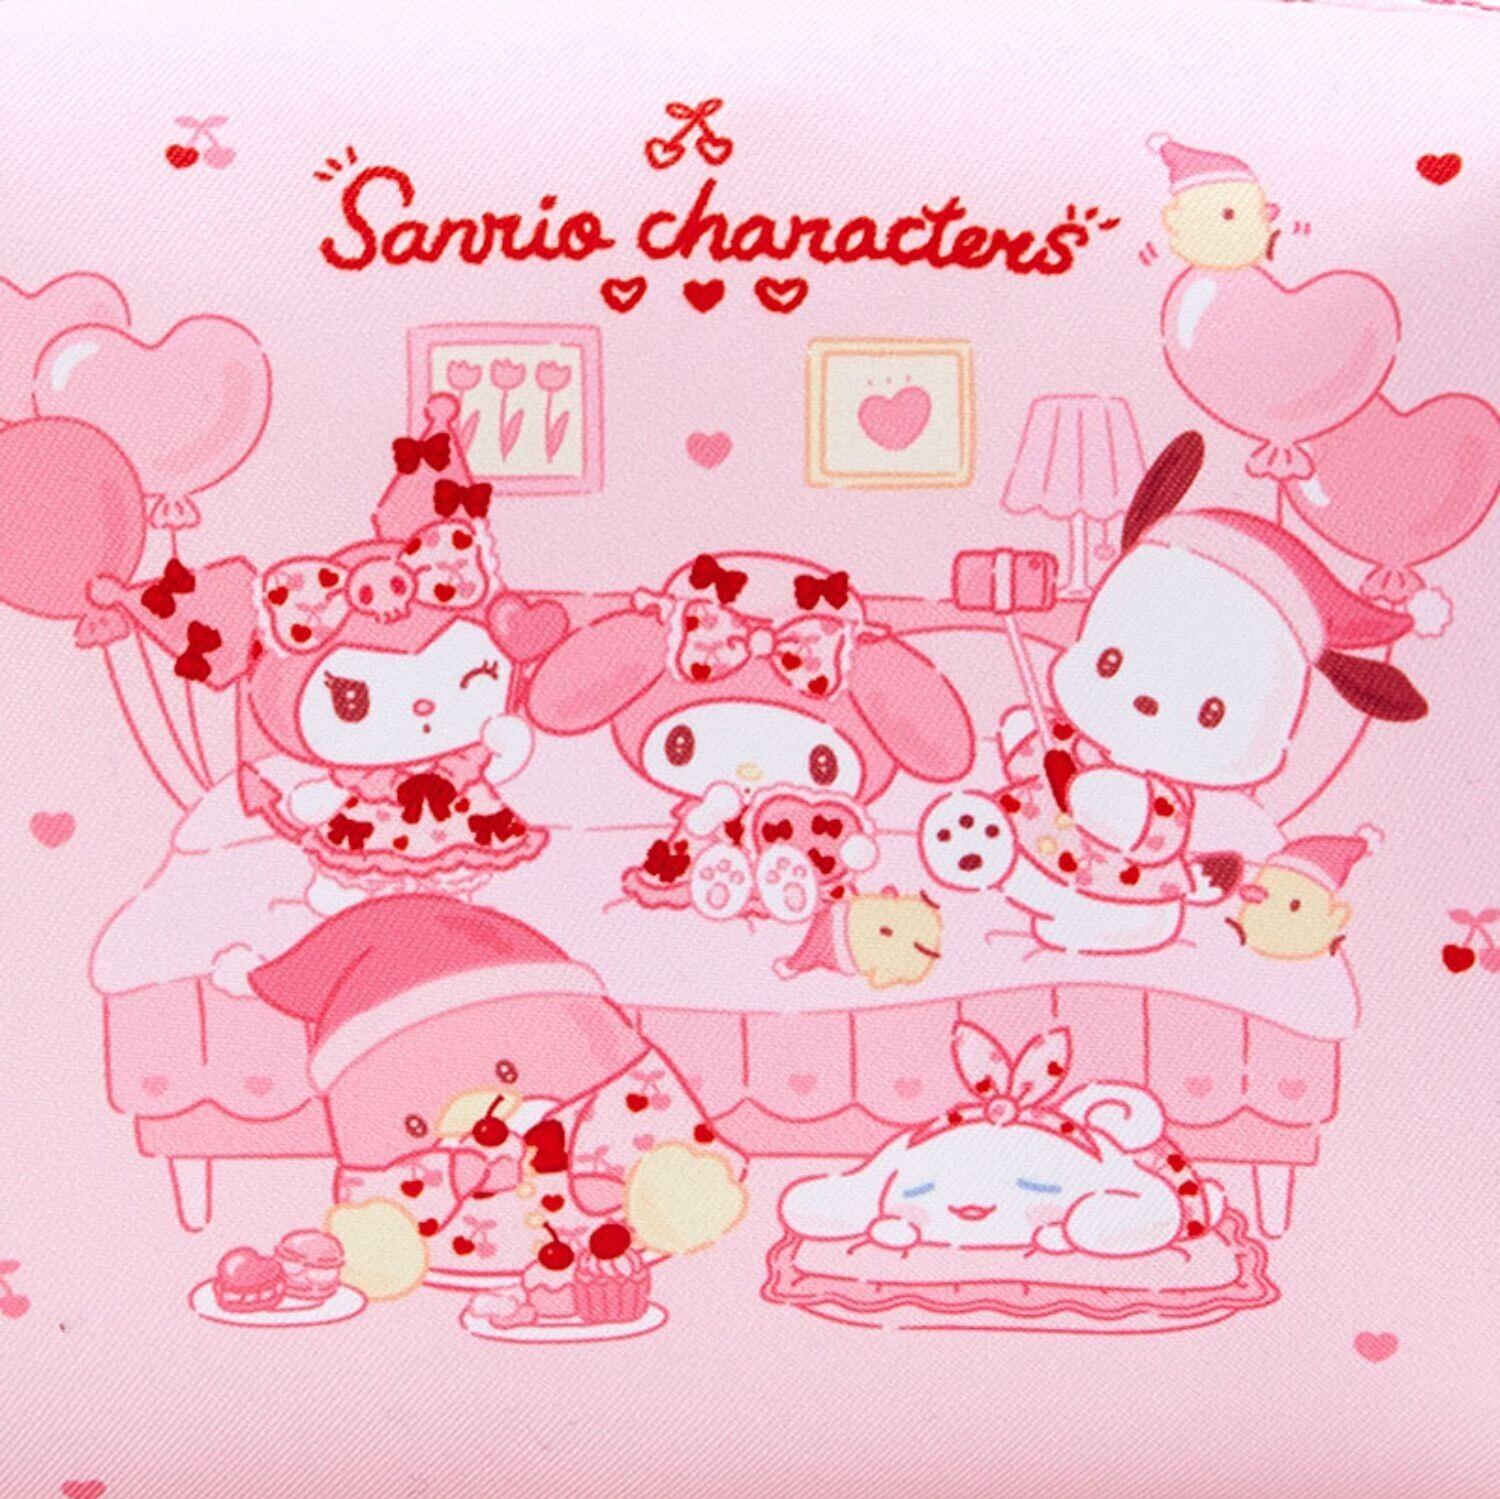 Sanrio Characters Pouch Happy Hocance Design My Melody